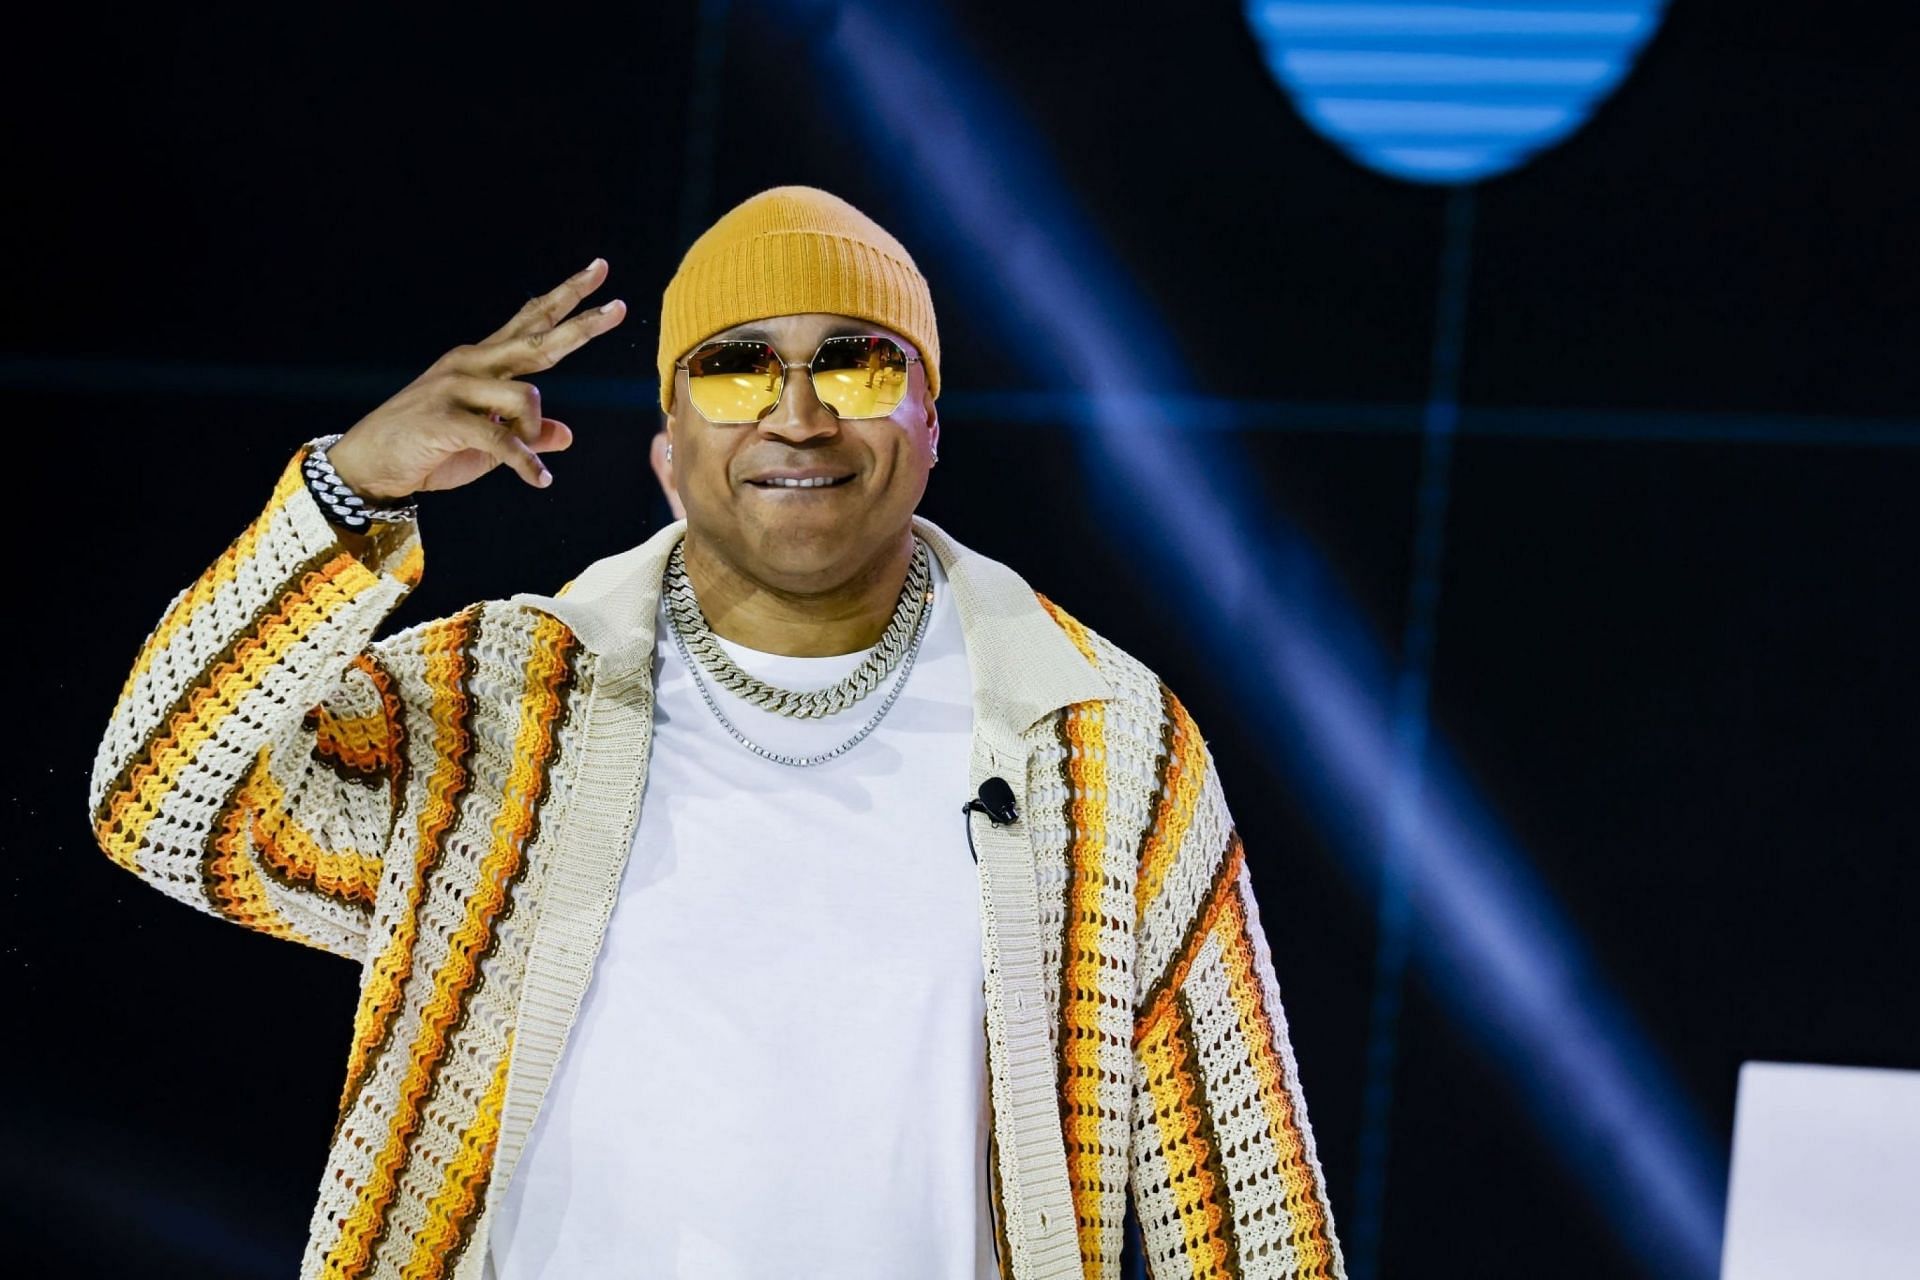 LL Cool J The Force Love Tour 2023 Lineup, tickets, presale, dates